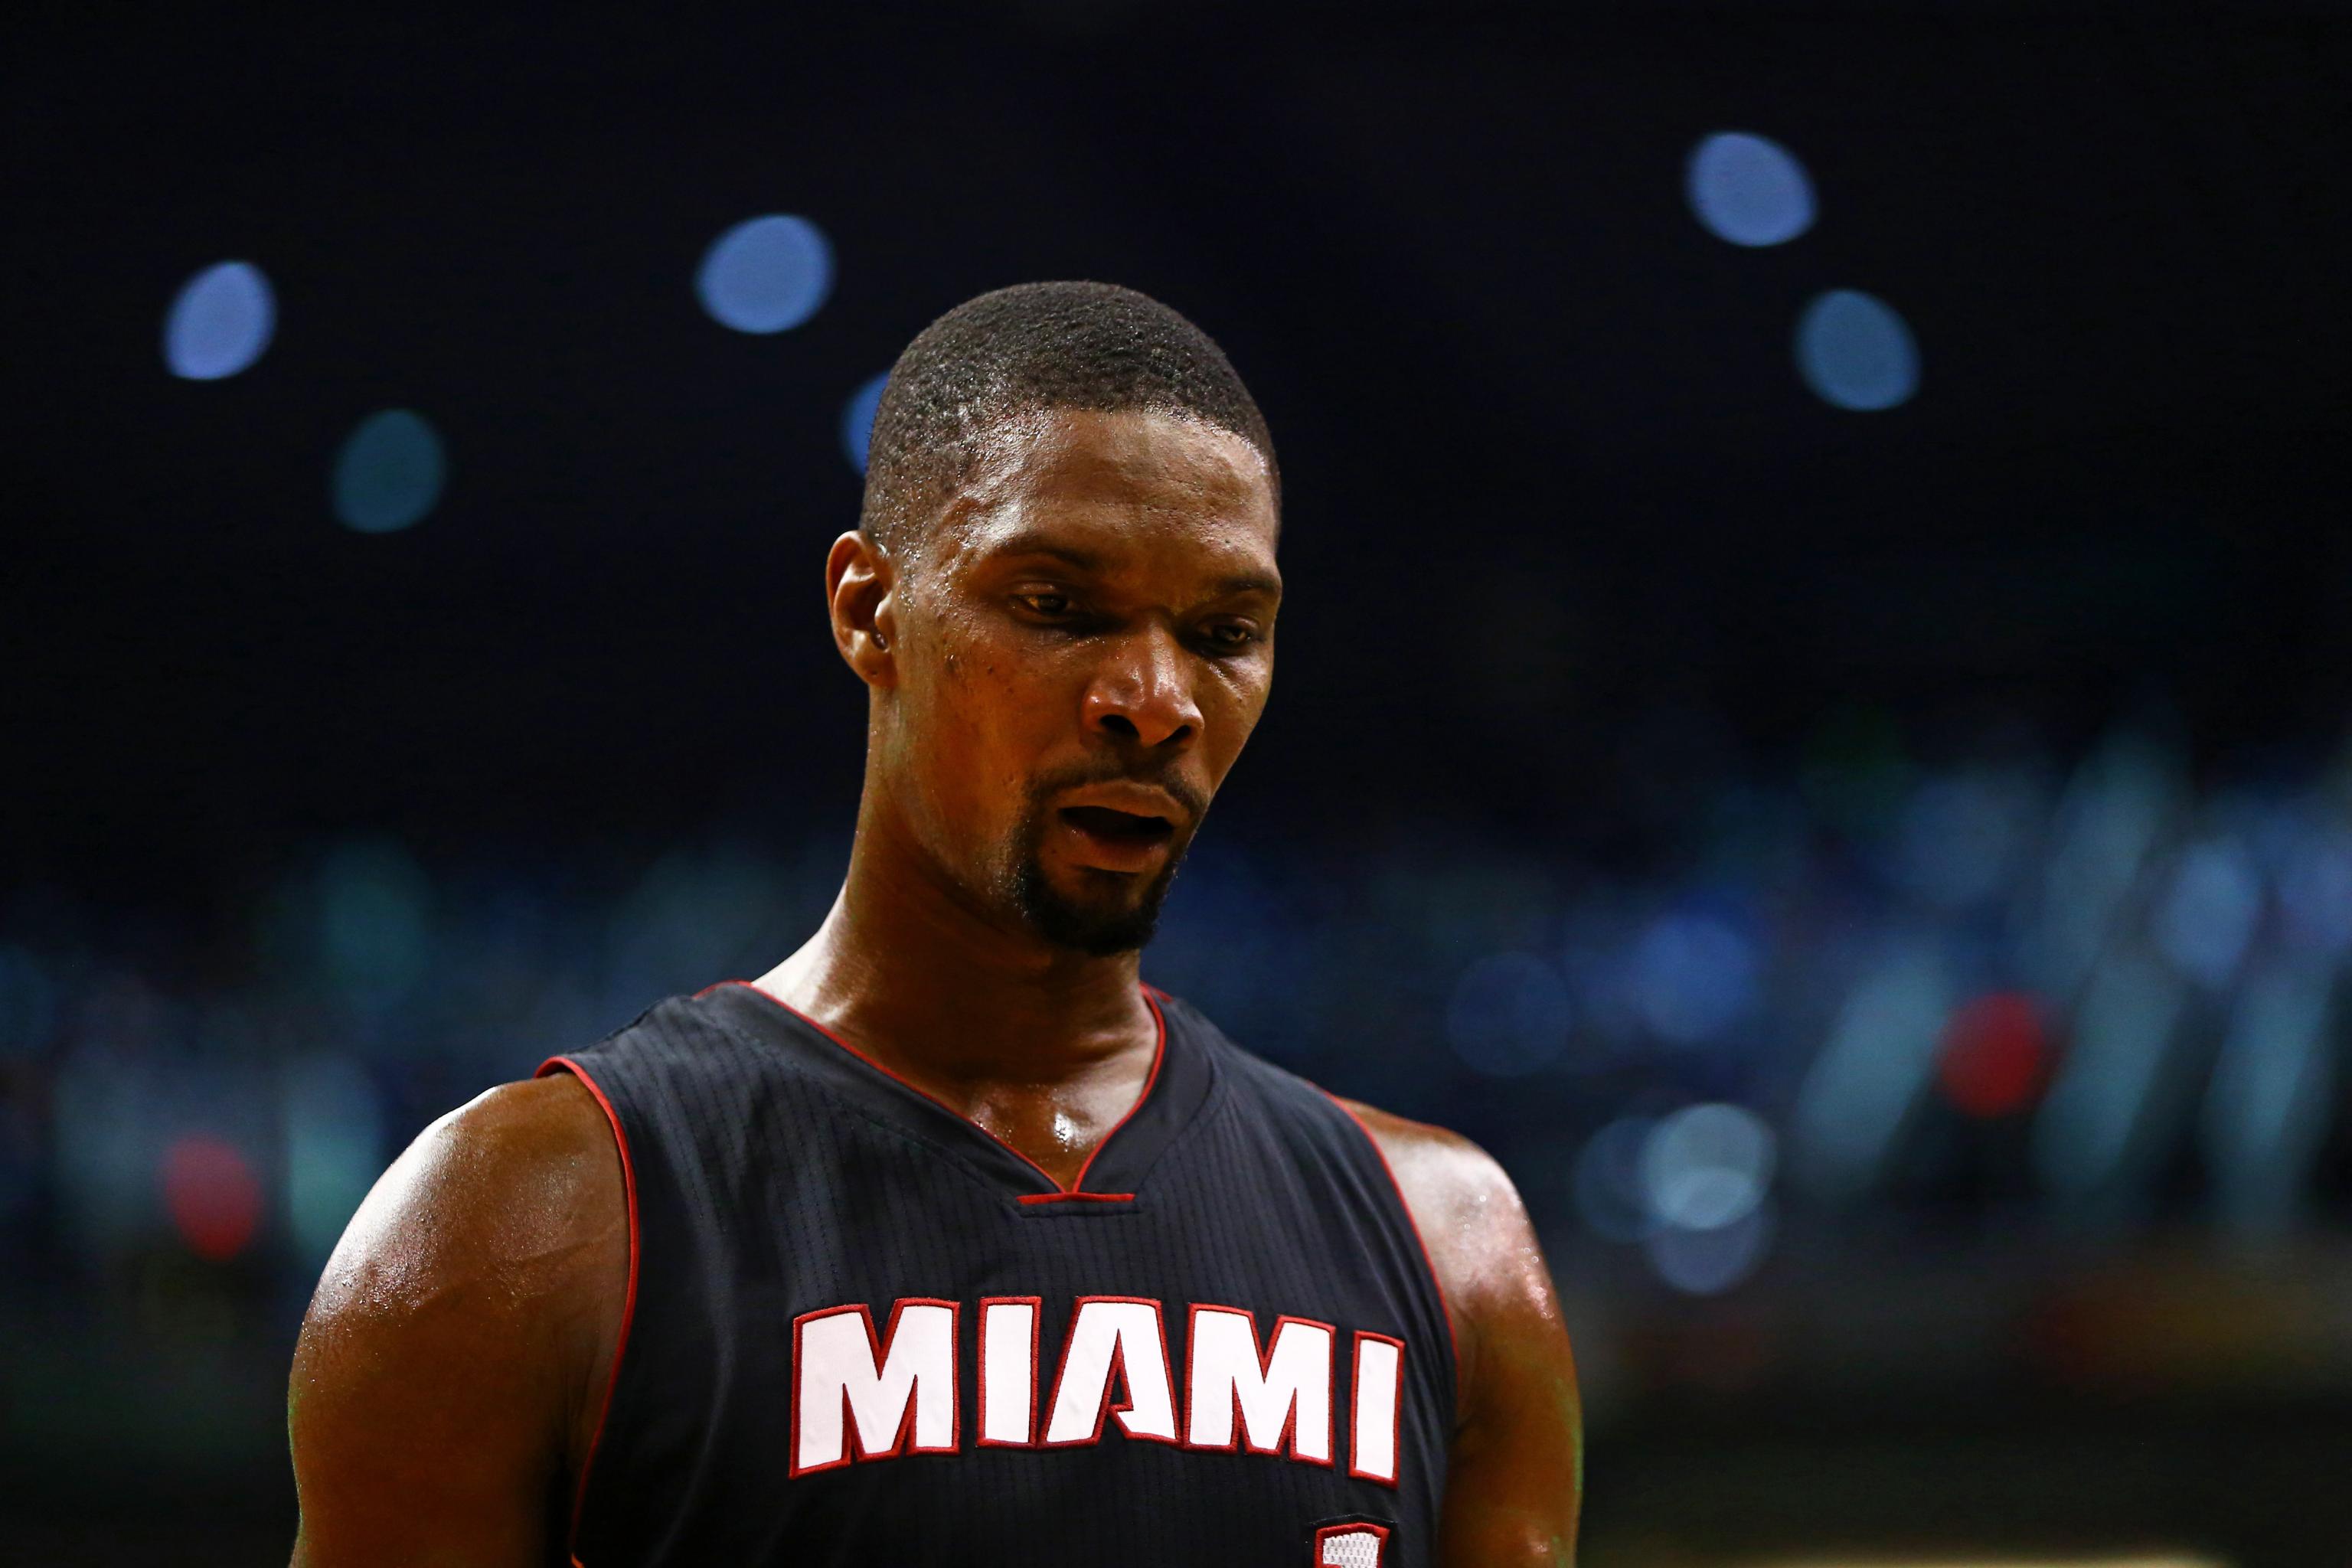 Chris Bosh has different view on life after near-death experience